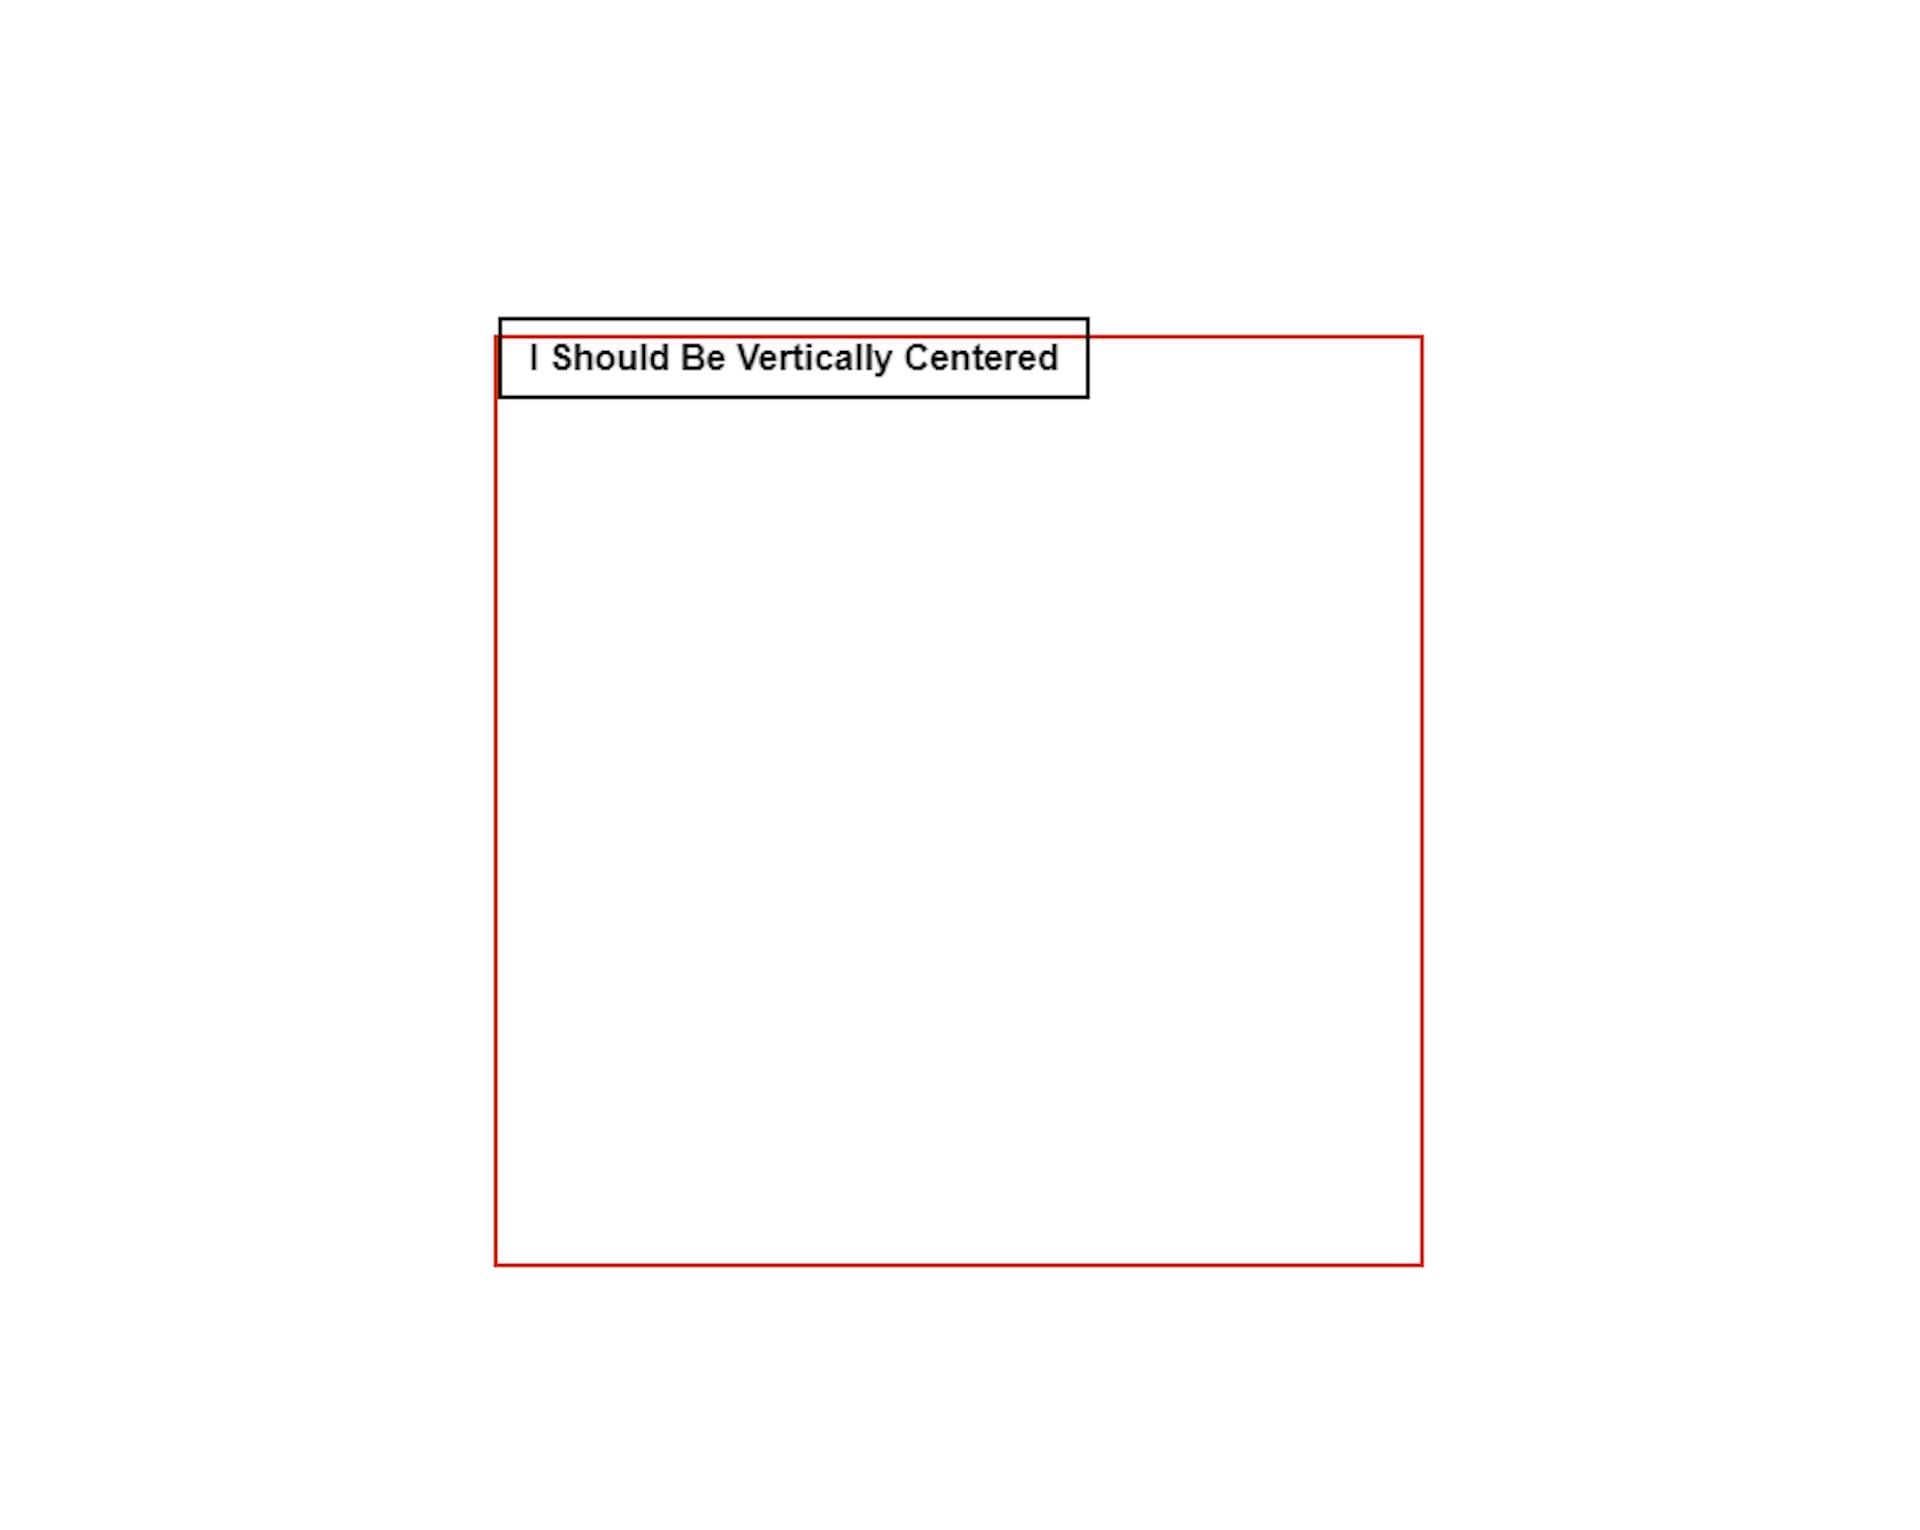 Demo before using CSS Flexbox to center items